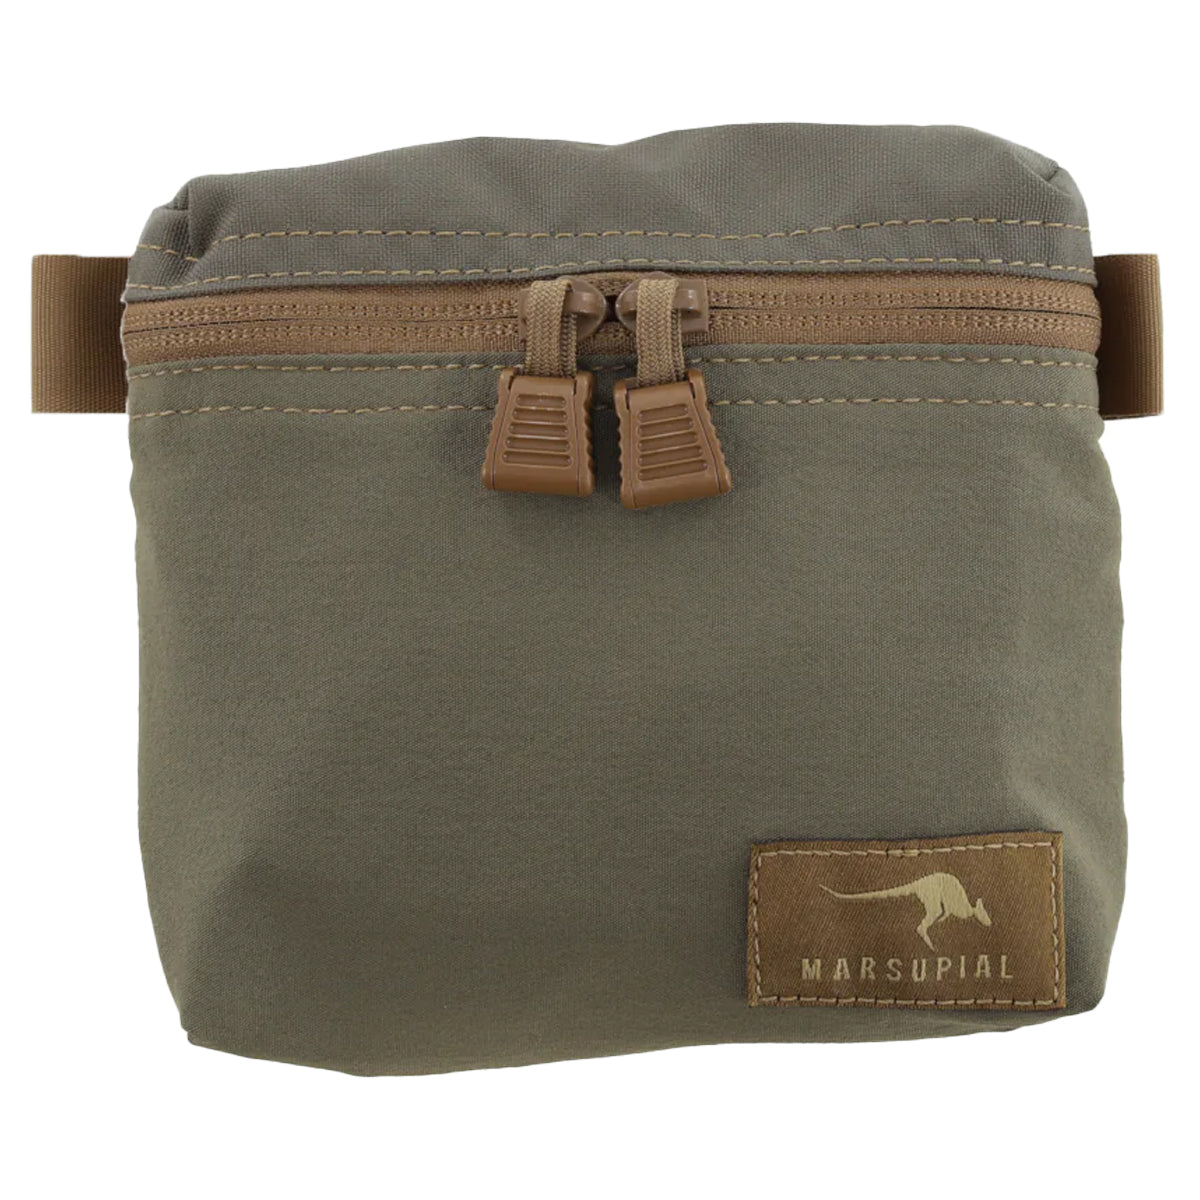 Marsupial Gear Stretch Belt Pouch in  by GOHUNT | Marsupial Gear - GOHUNT Shop